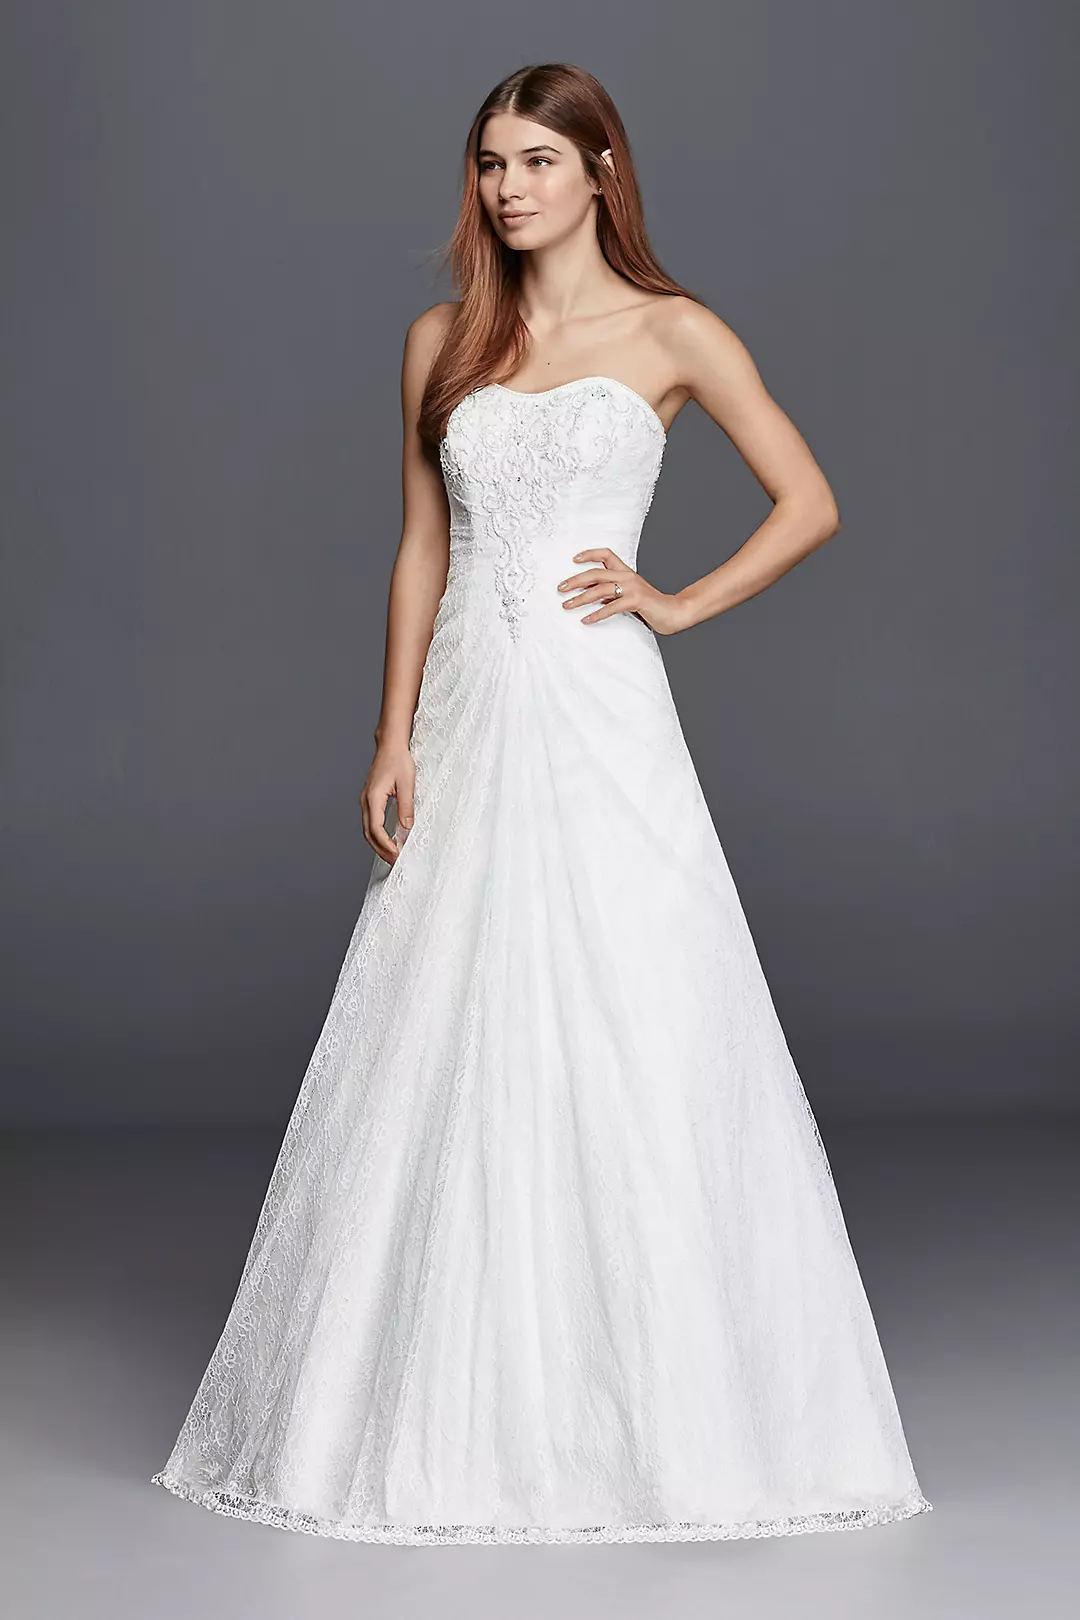 Strapless Wedding Dress with Allover Lace Image